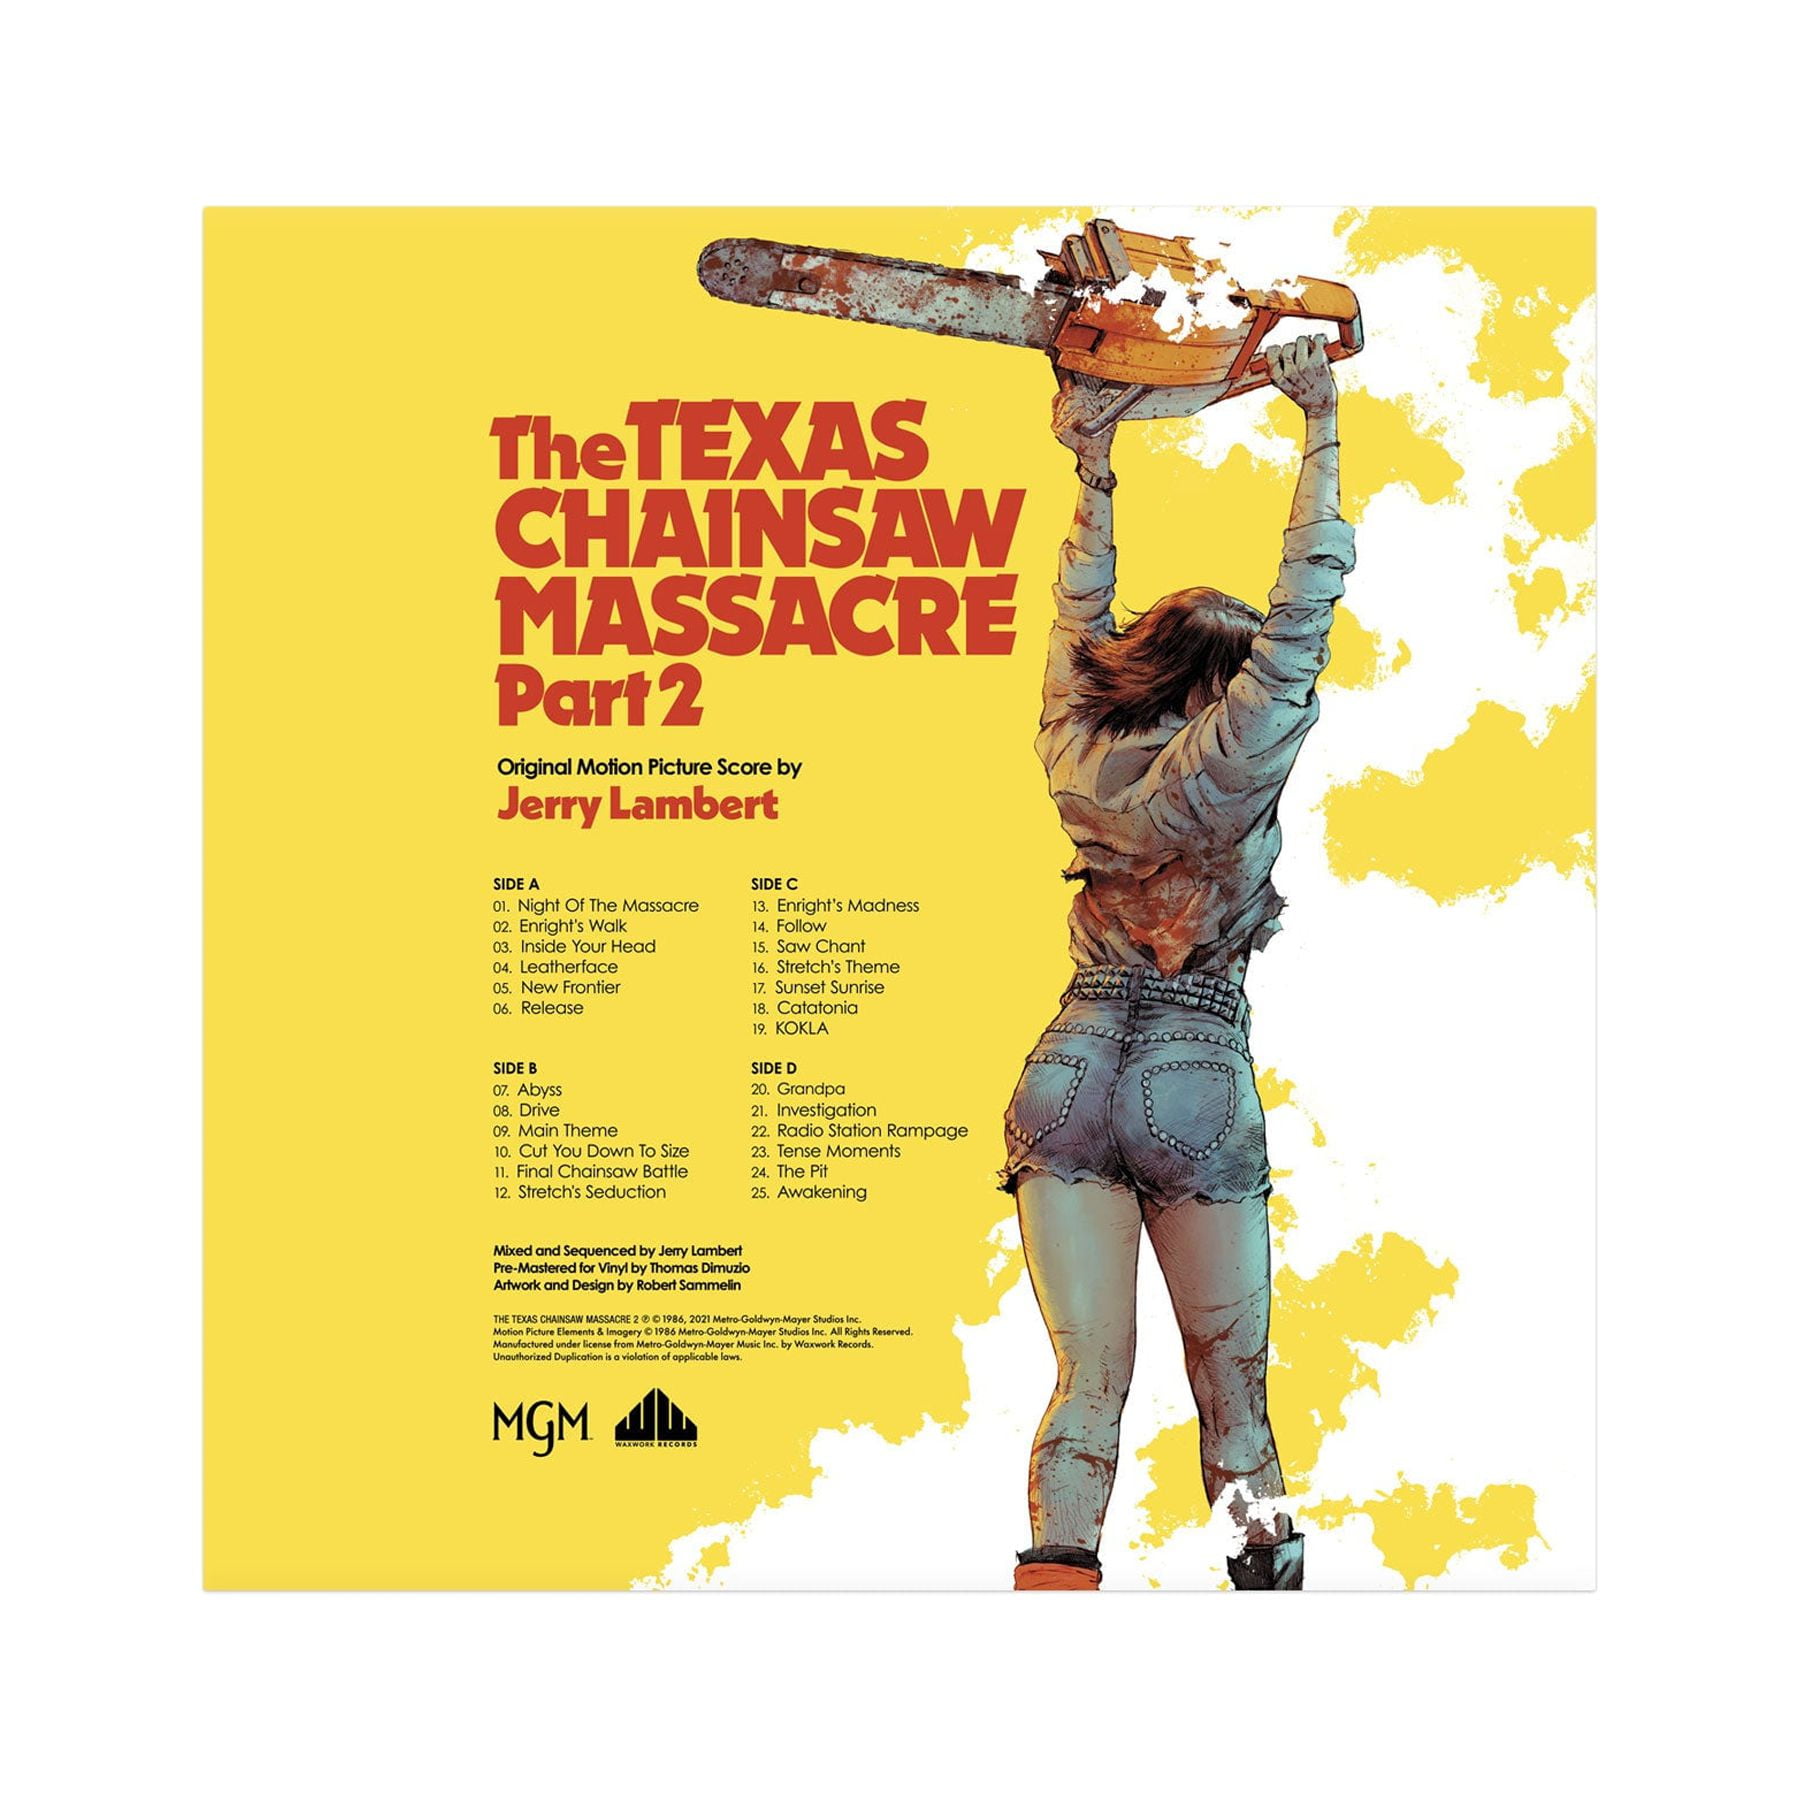 The Texas Chain Saw Massacre – The Brattle